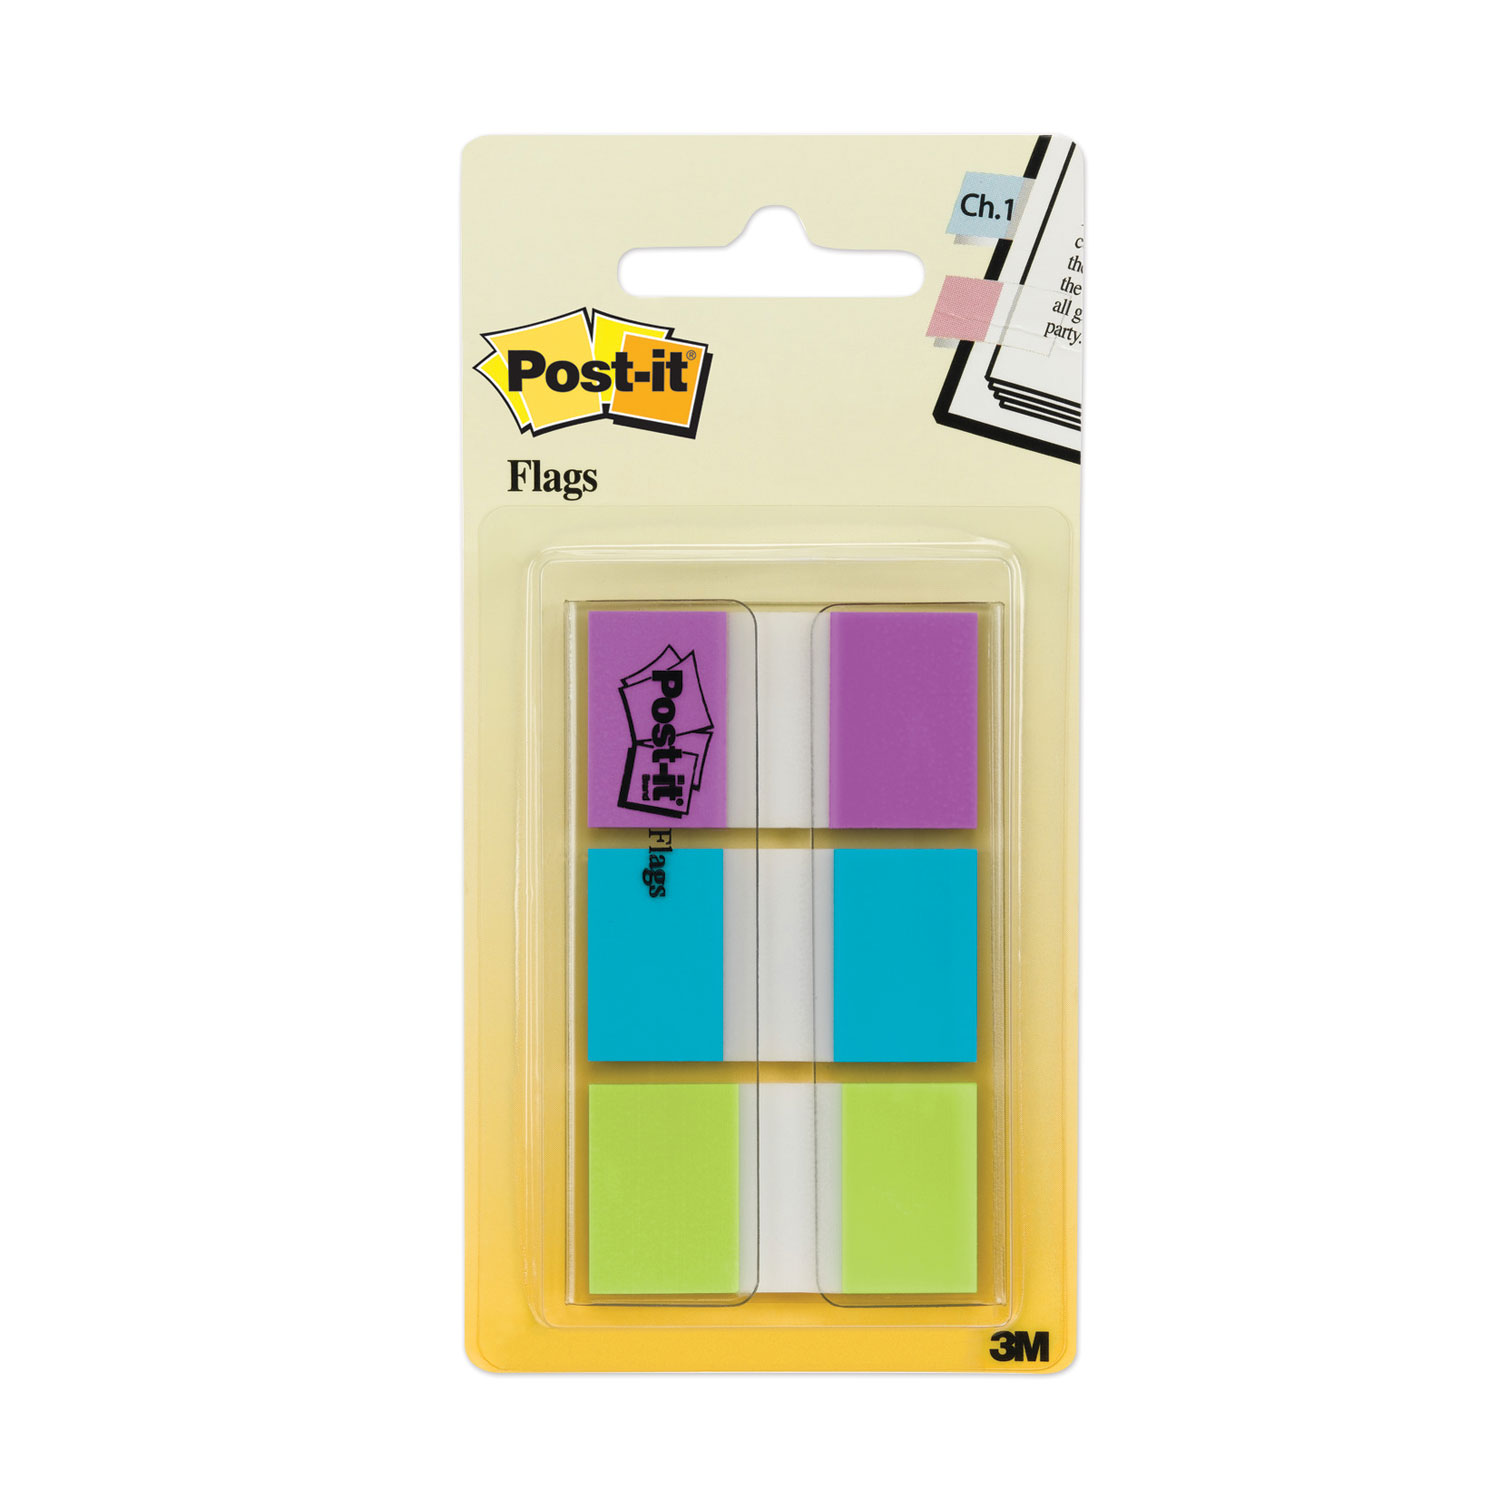 Post-it® Flags 0.94 Wide Flags with Dispenser, Bright Blue, Bright Green, Purple, 60 Flags